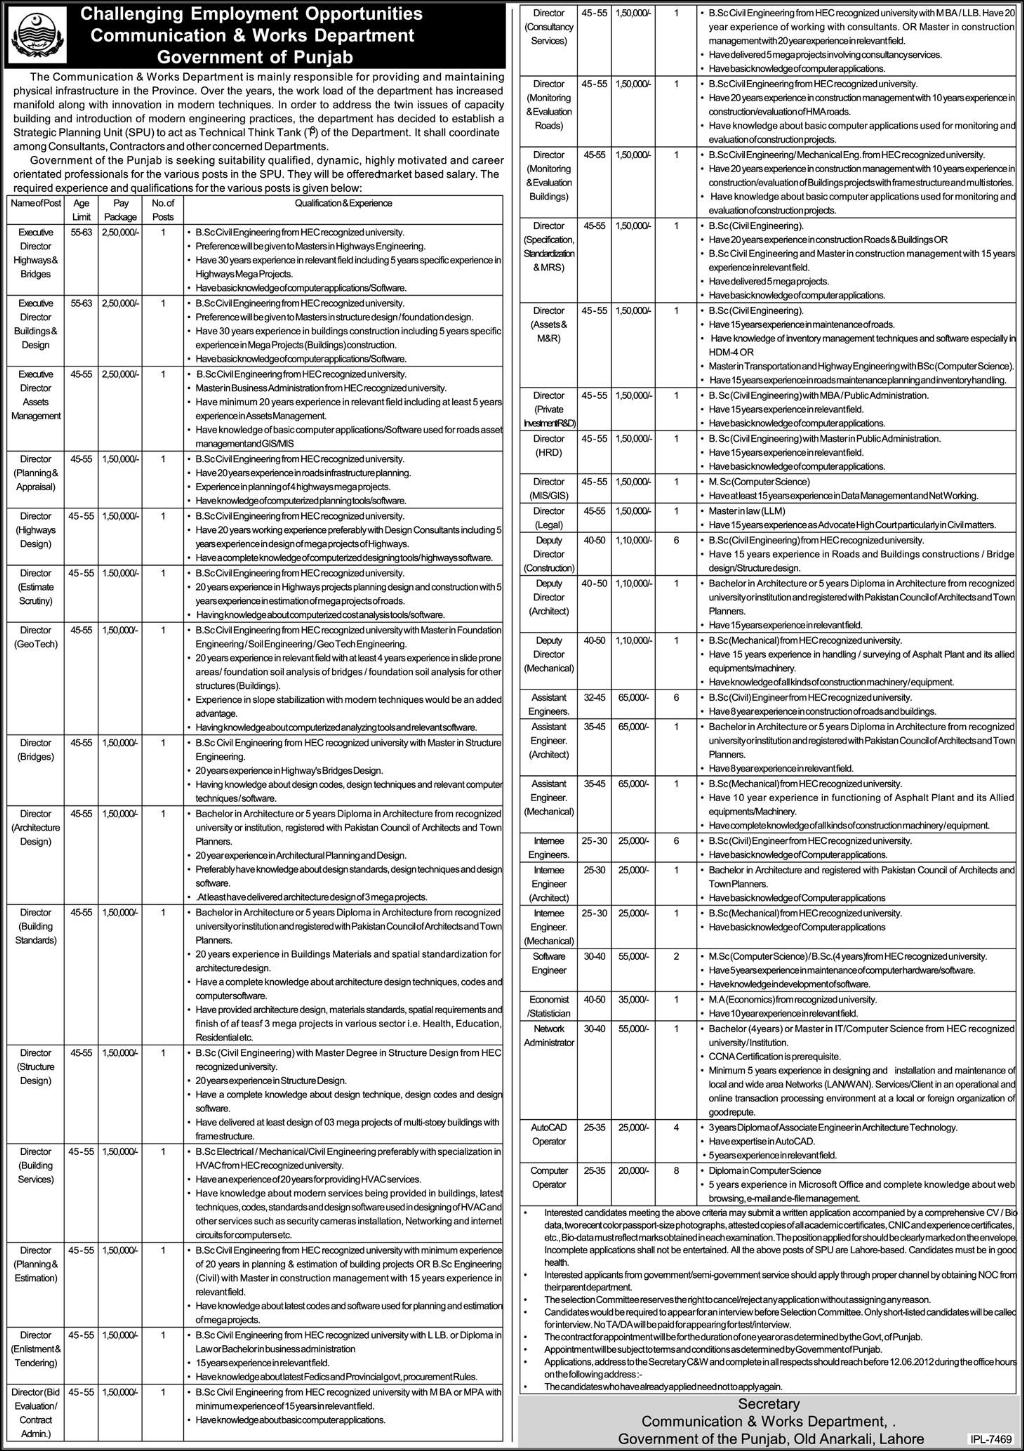 Executive and Engineering Jobs at Communication & Works Department in (SPU) Government of Punjab)